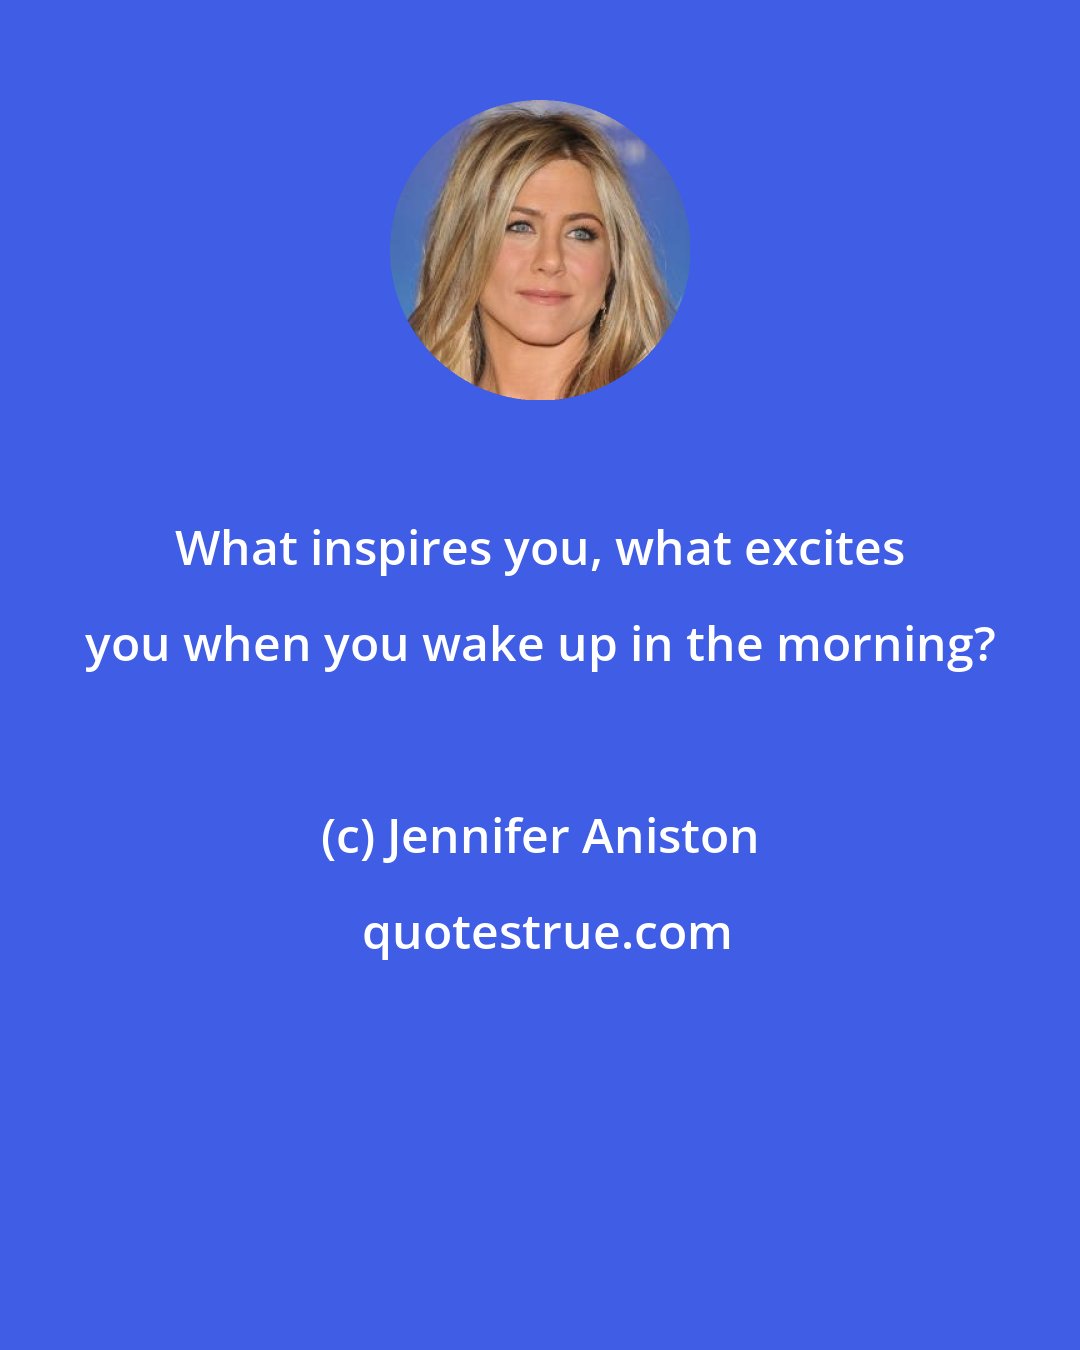 Jennifer Aniston: What inspires you, what excites you when you wake up in the morning?